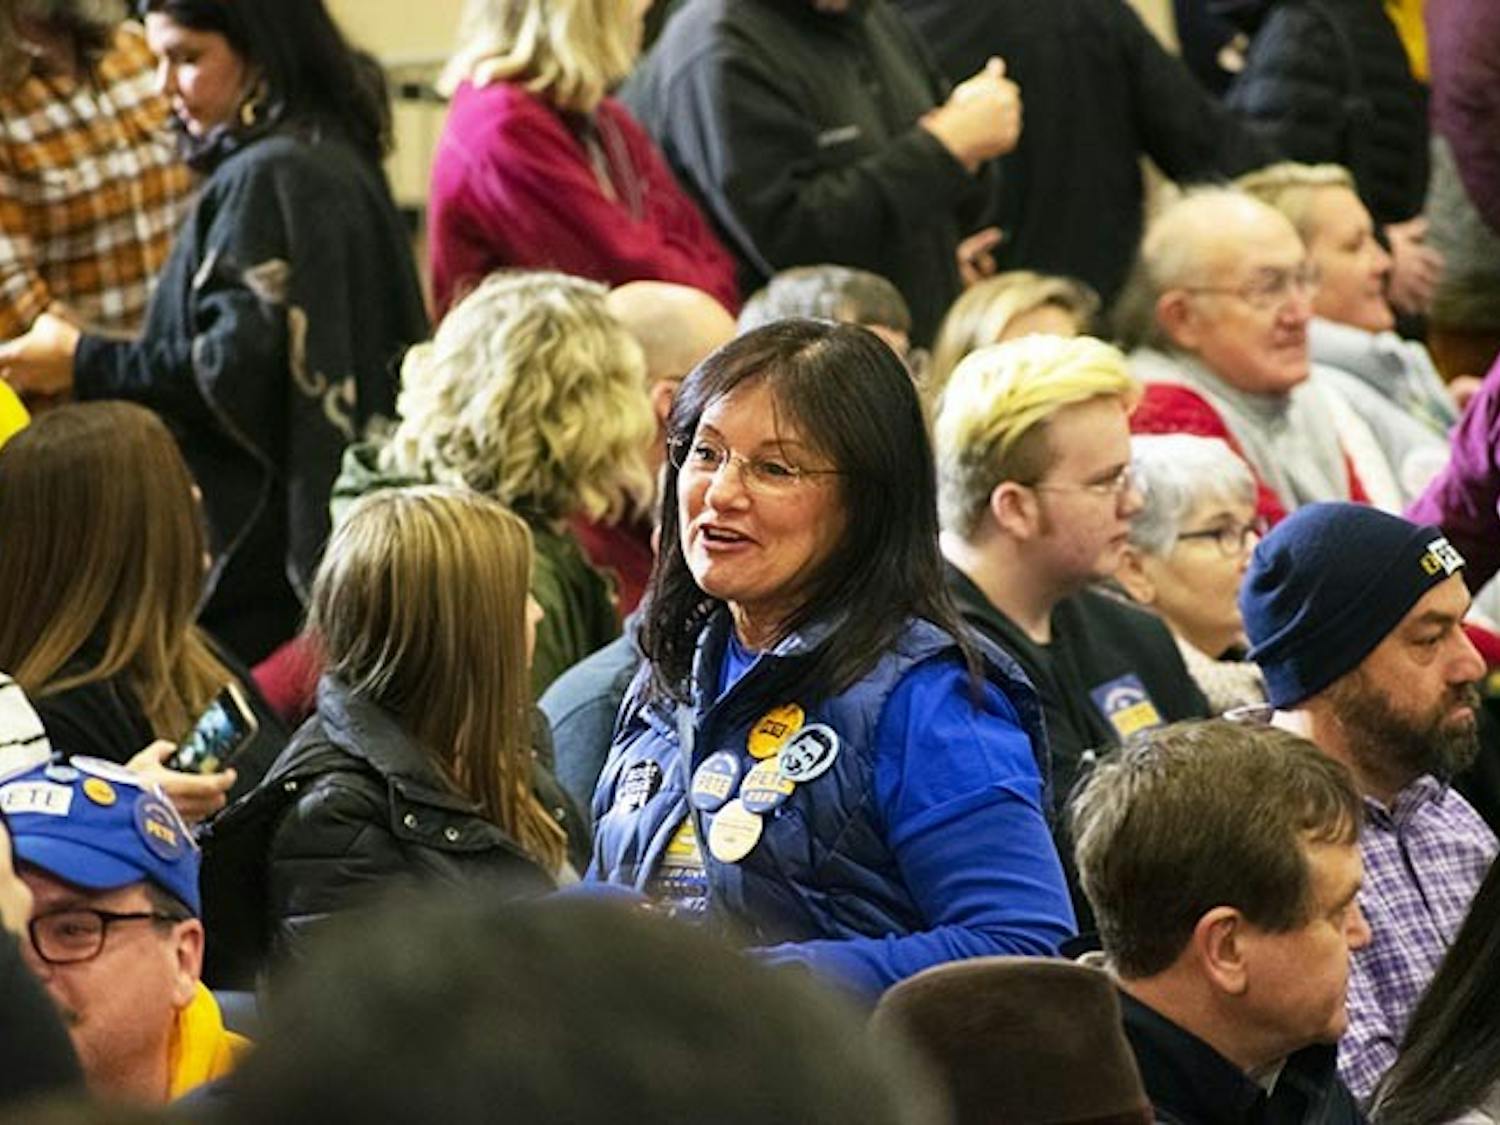 Volunteers and attendees watch Pete Buttigieg speak the Get Out the Vote town hall in Seven Oaks Park on Feb. 29, 2020.